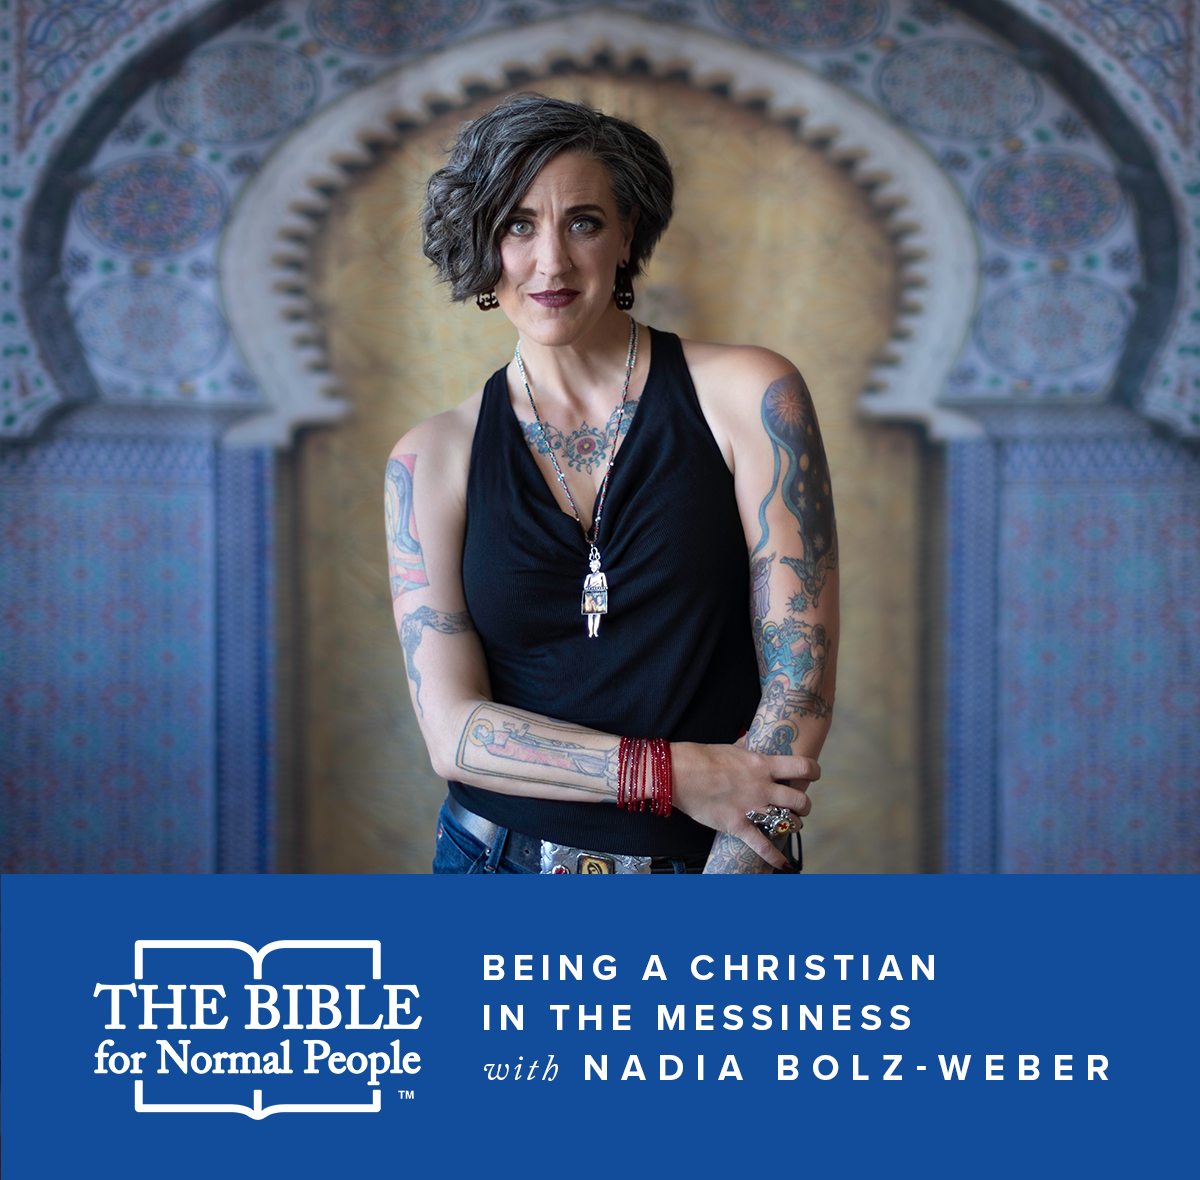 Interview with Nadia Bolz-Weber: Being a Christian in the Messiness